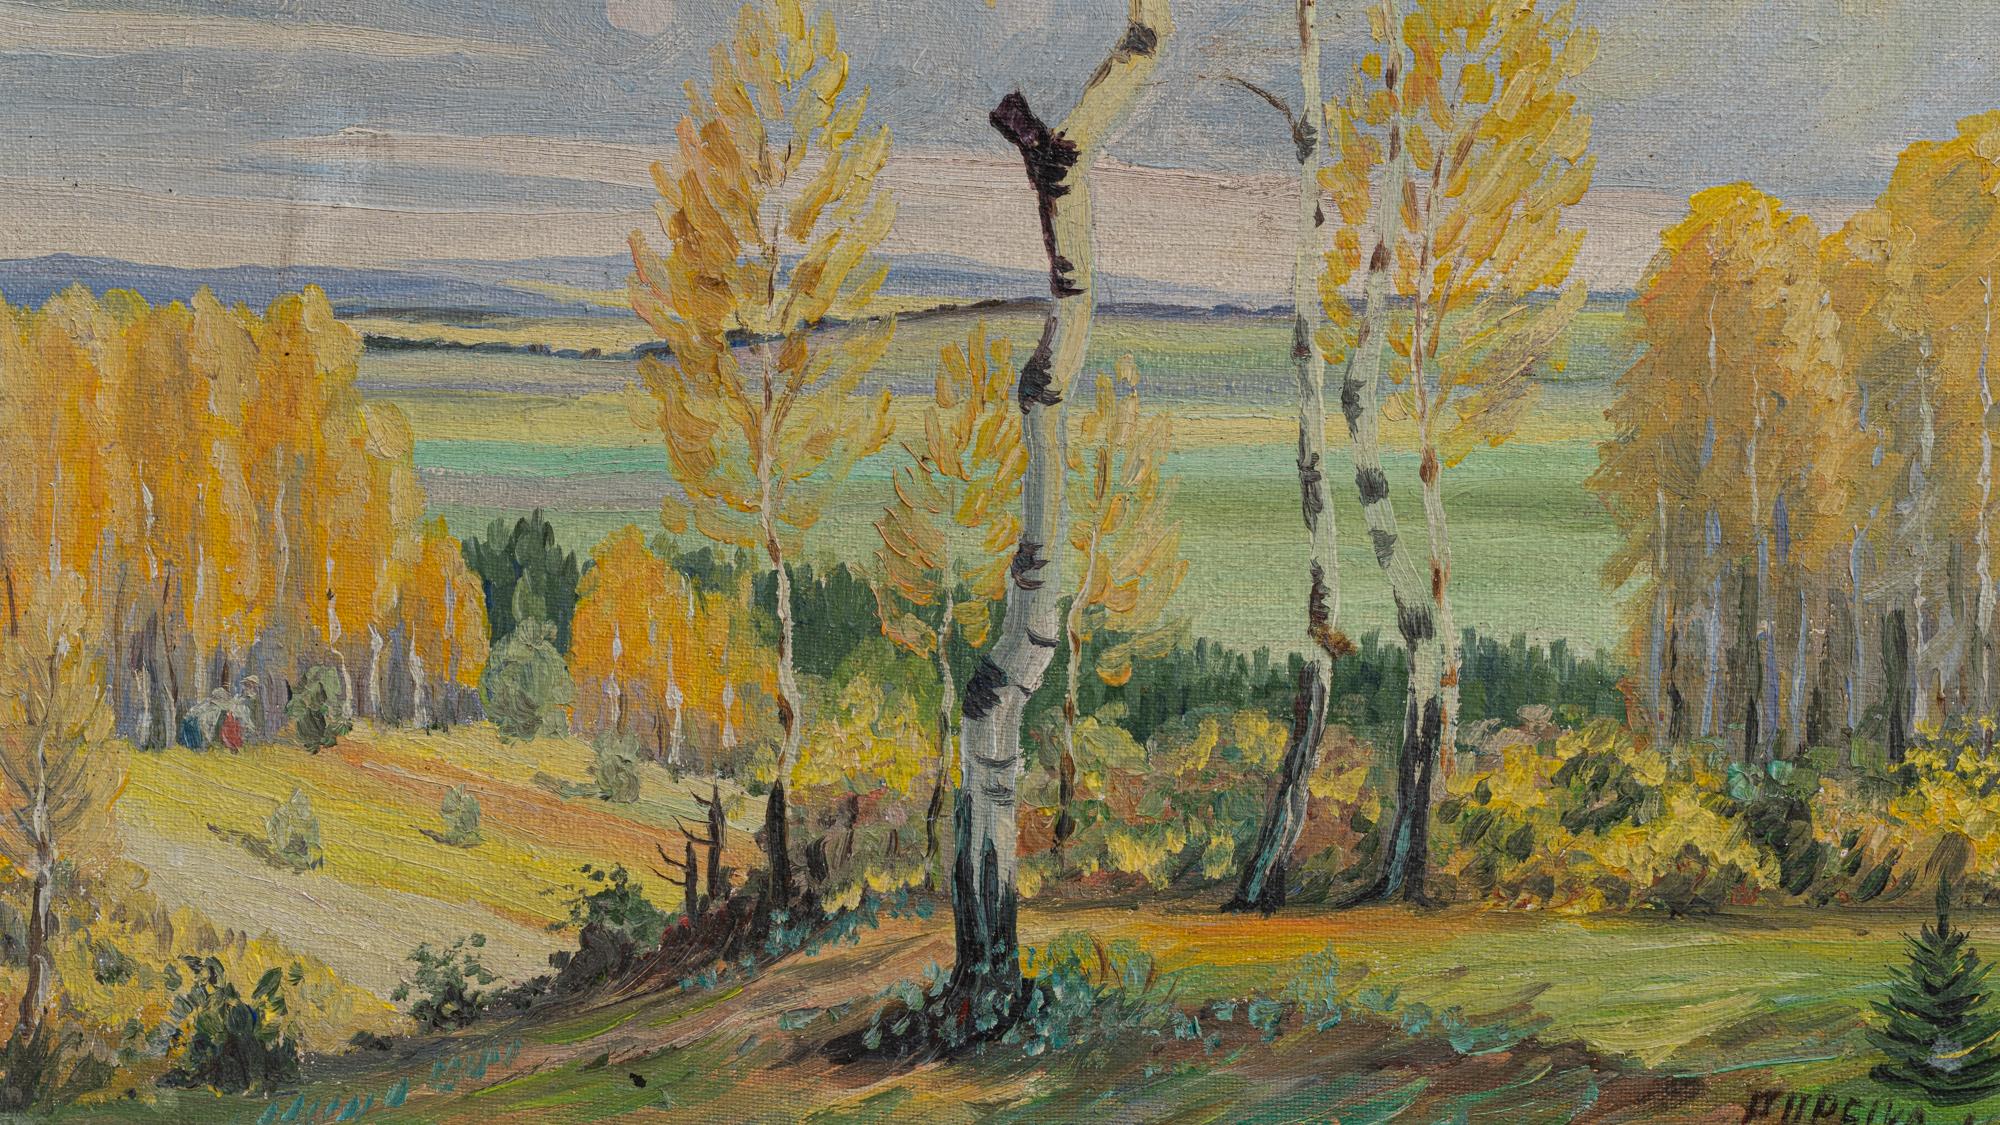 Bathed in the warm glow of autumn, this early 20th Century Belgian painting captures the essence of fall's splendor. The scene is a rich tapestry of golden-hued trees, standing tall and proud, their leaves a dance of yellow and amber against a